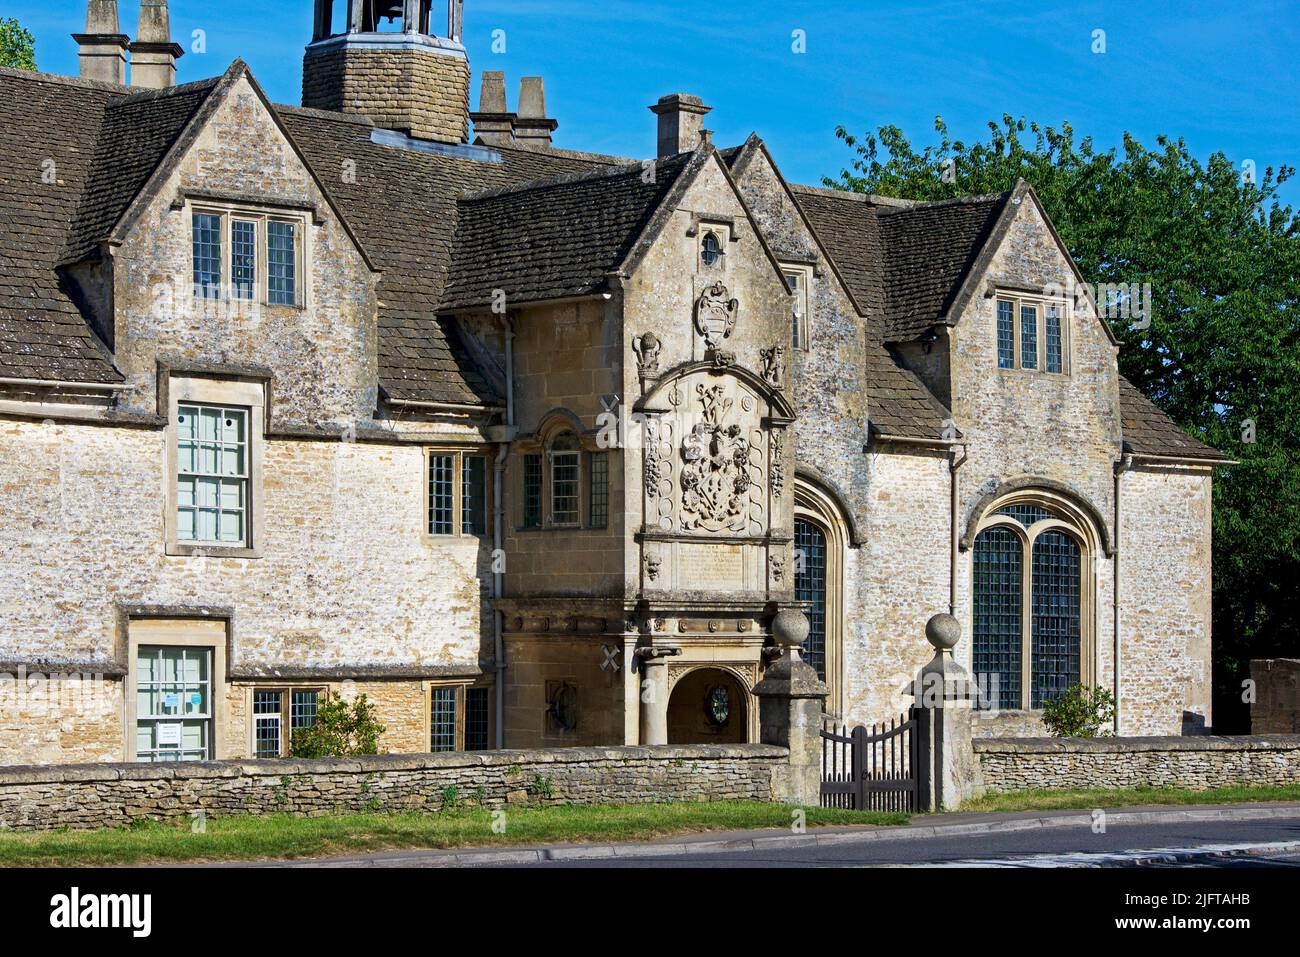 17th century Hungerford almshouses in Corsham, Wiltshire, England UK Stock Photo